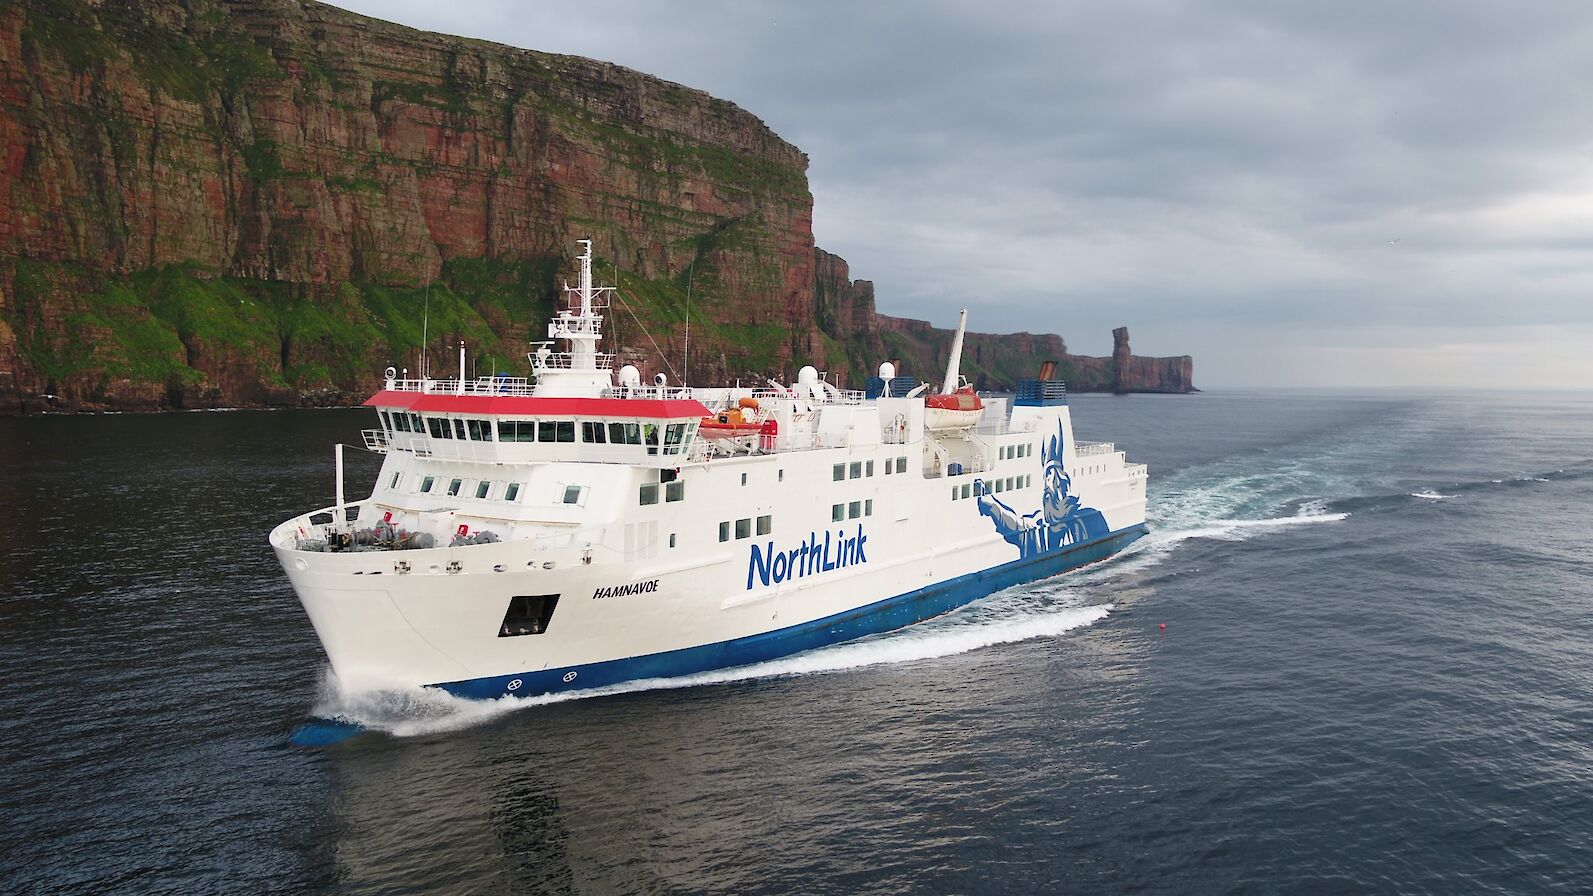 NorthLink Ferries vessel 'Hamnavoe' sailing past the cliffs of Hoy, Orkney - image by Nick McCaffrey